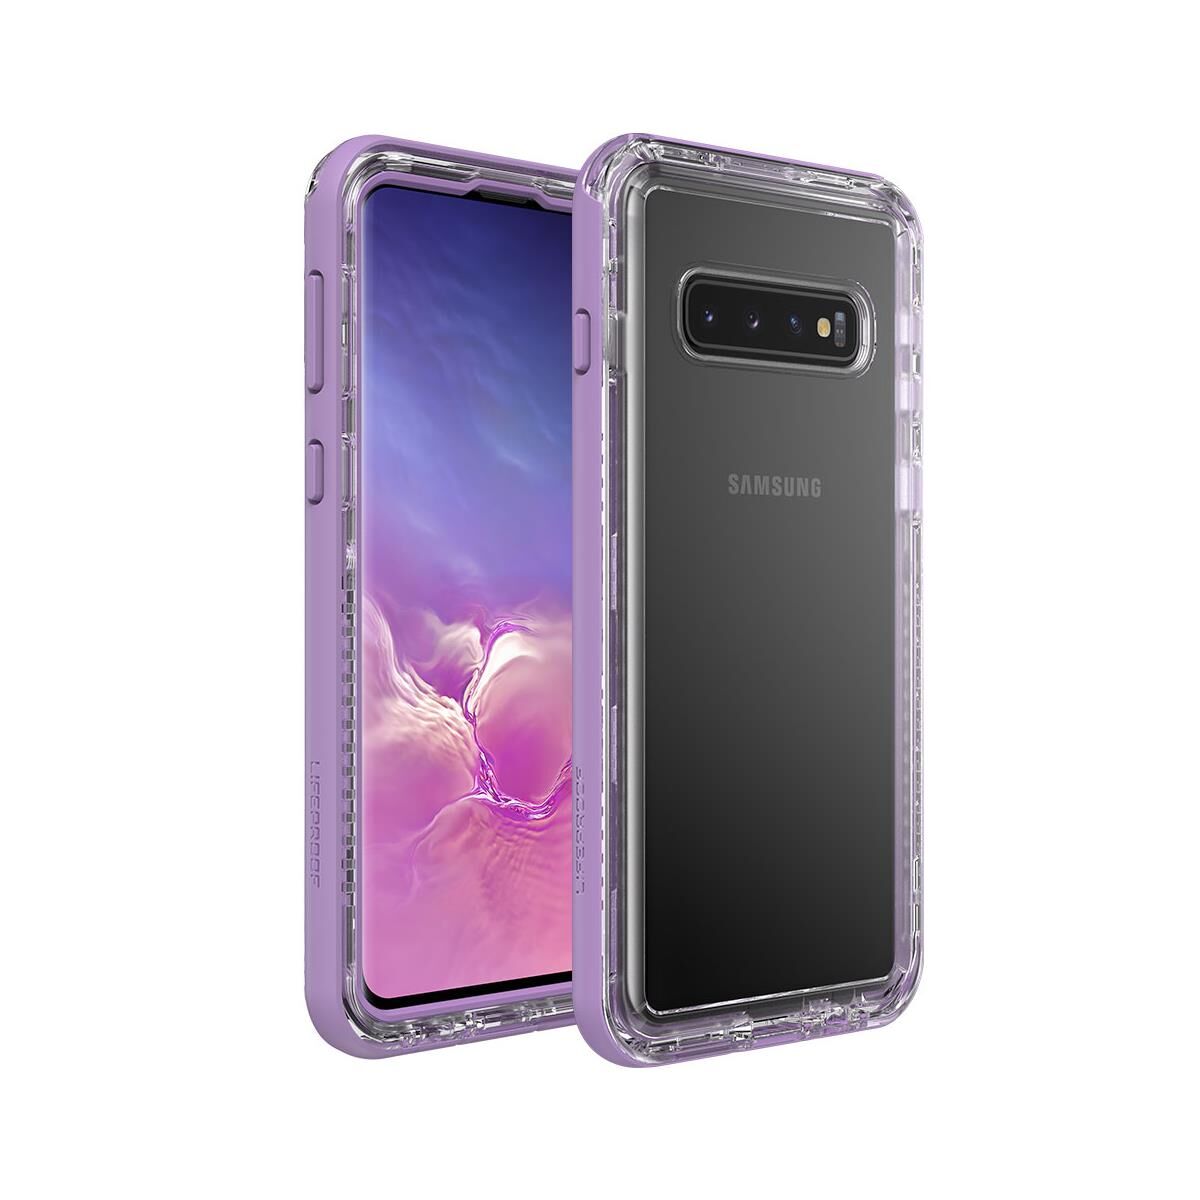 LifeProof NEXT Case for Samsung Galaxy S10 Smartphone, Ultra